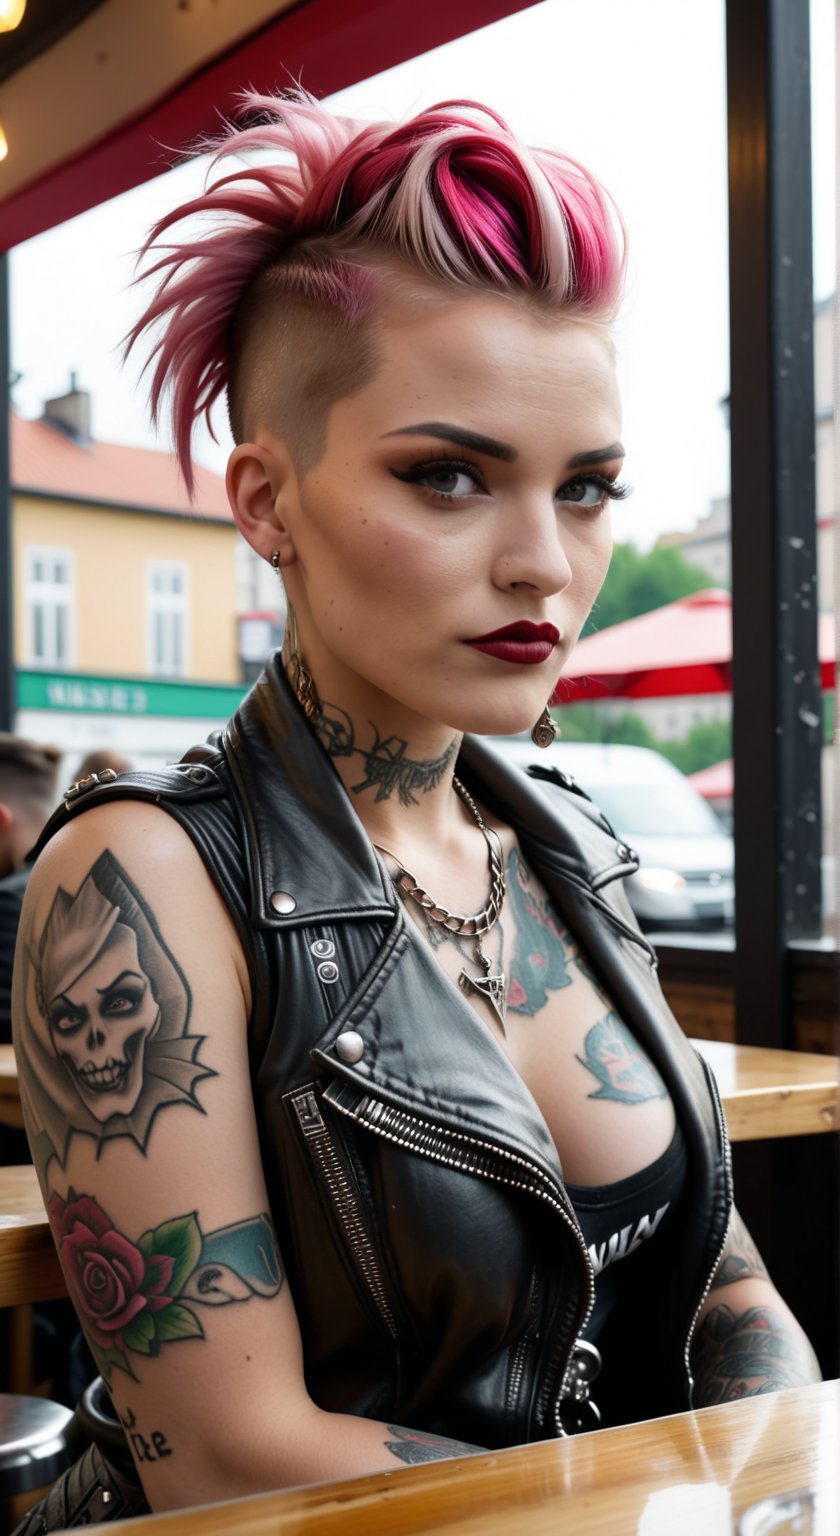 podkowinski year 2020, beautiful punk girl in a cafe, in the background people at tables and a view of the city
 